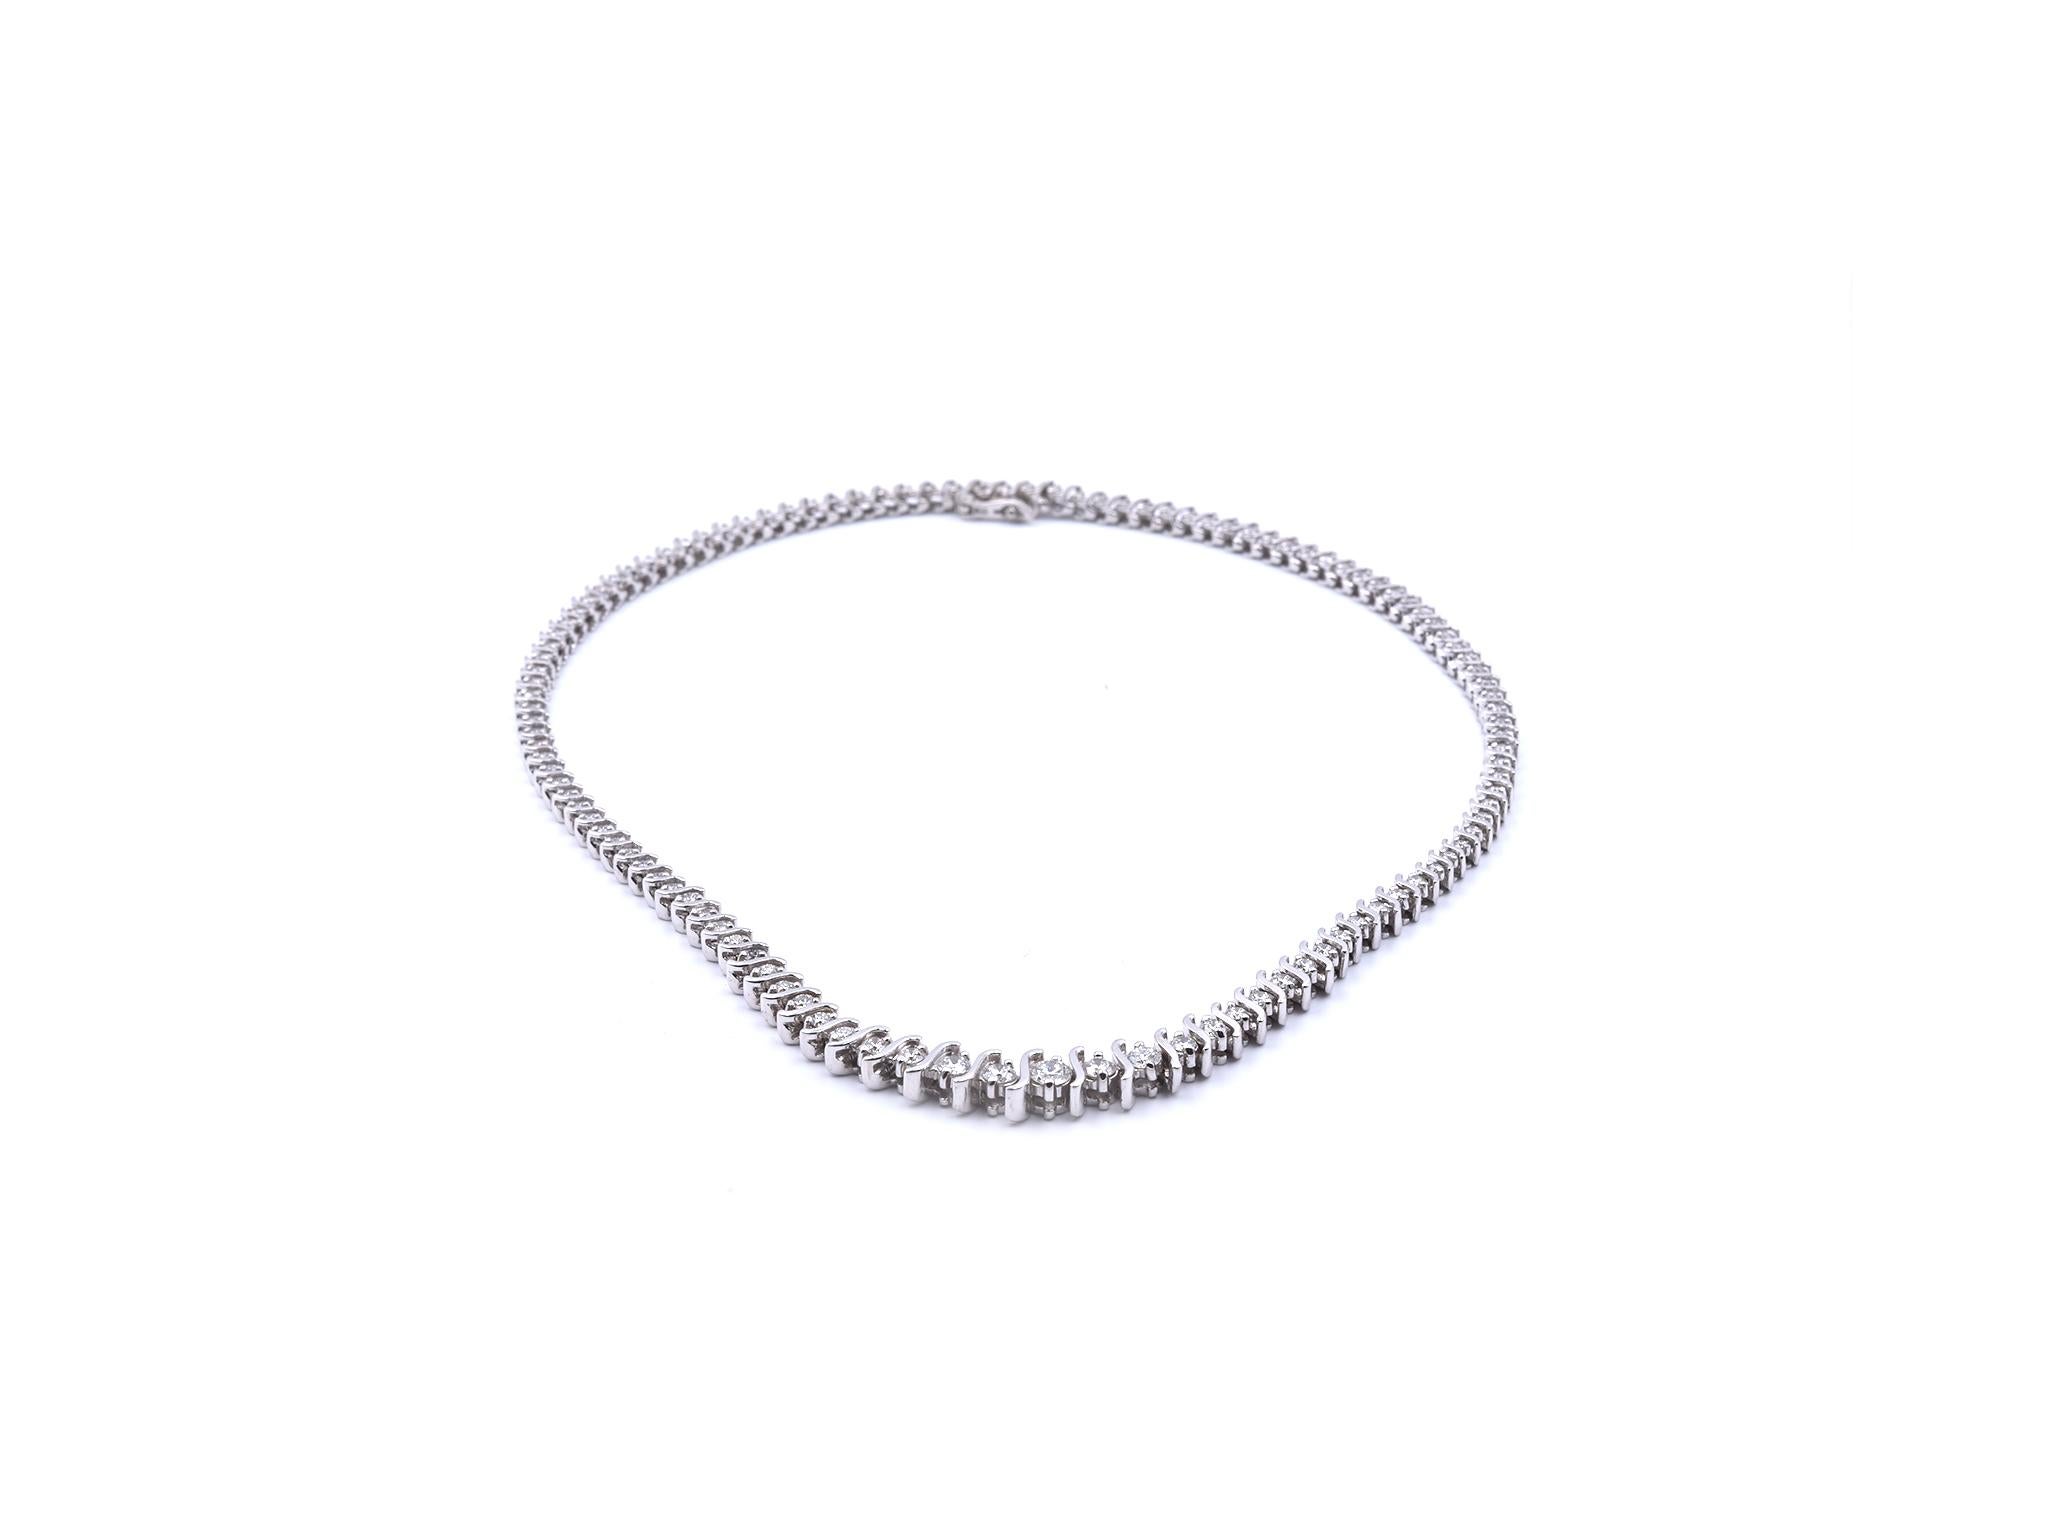 Designer: custom designed
Material: 14k white gold
Diamonds: round brilliant cut = 4.25cttw
Color: G
Clarity: VS-SI1
Dimensions: bracelet measures 7 inches mm wide and is 4.38mm wide
Weight: 34.22 grams